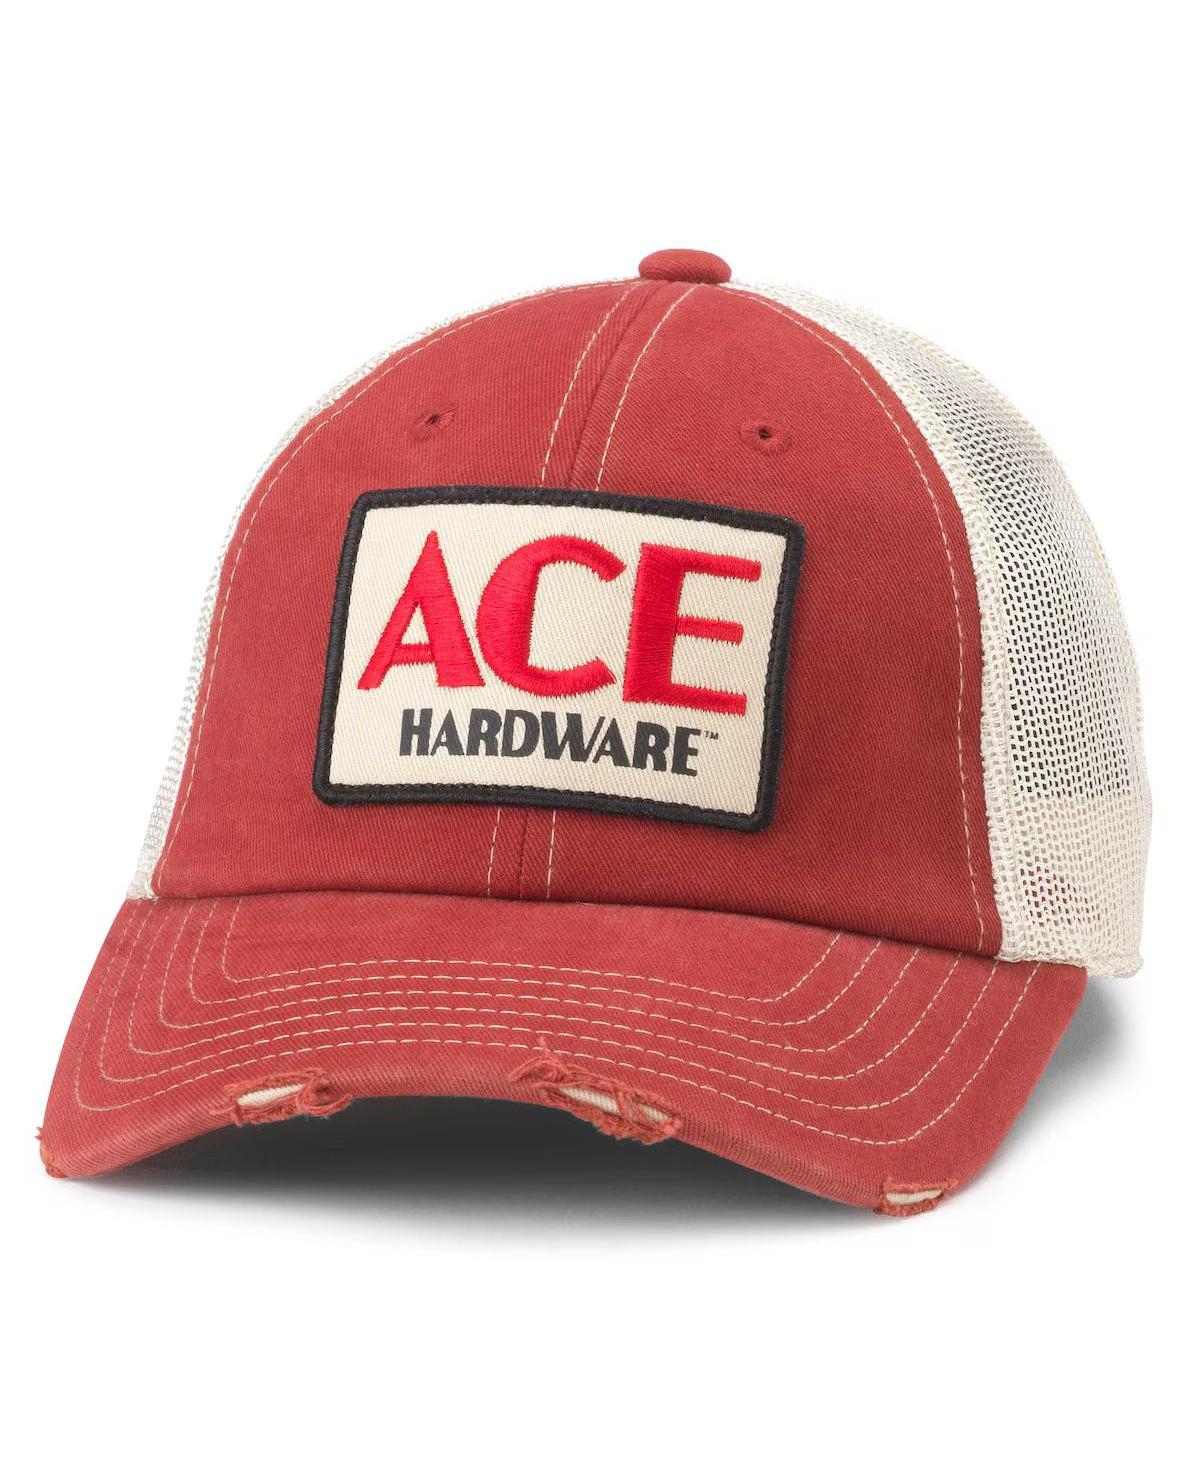 American Needle Men's Red/natural Ace Hardware Orville Adjustable Hat